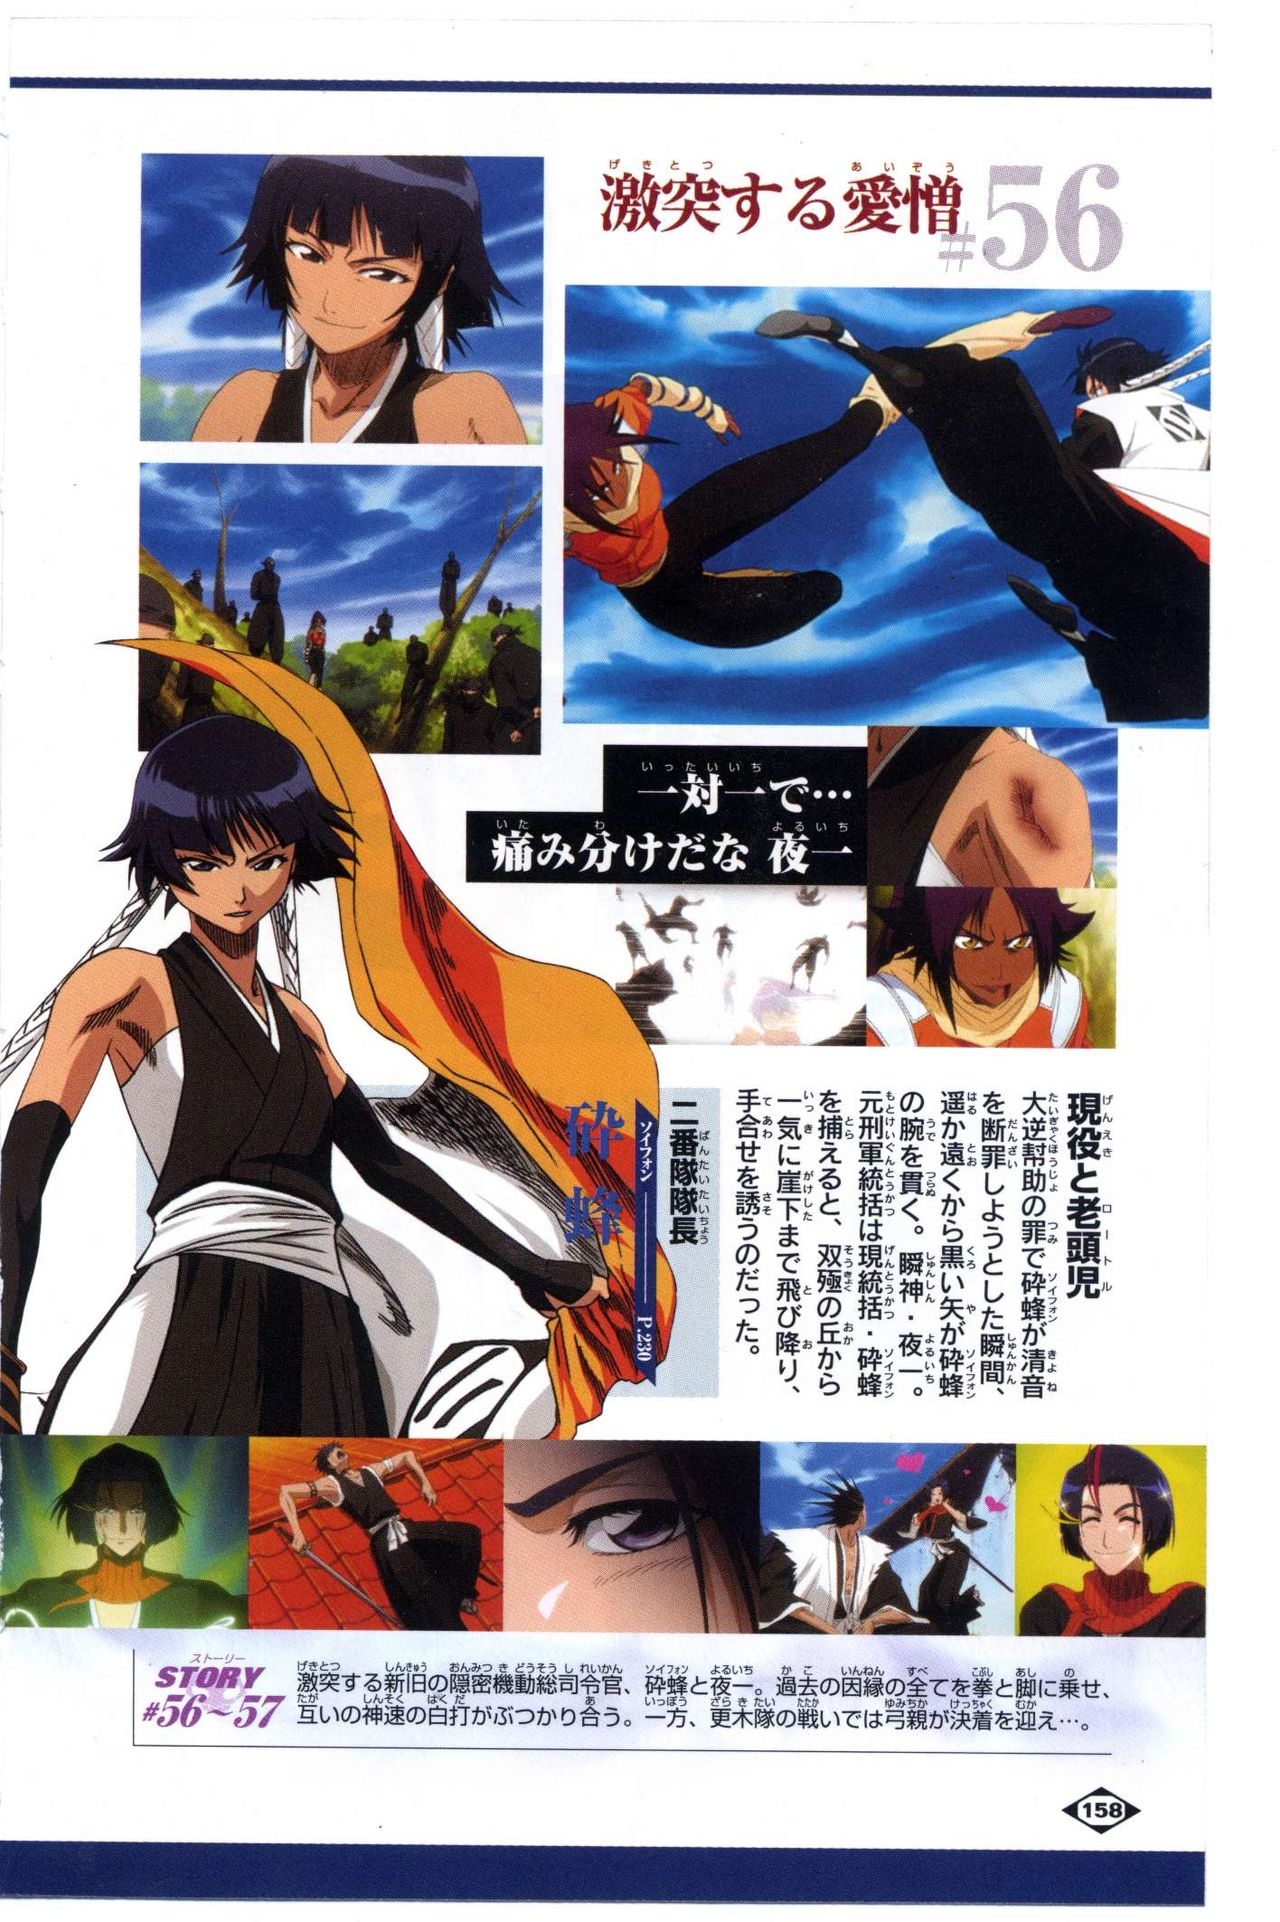 Bleach: Official Animation Book VIBEs 158